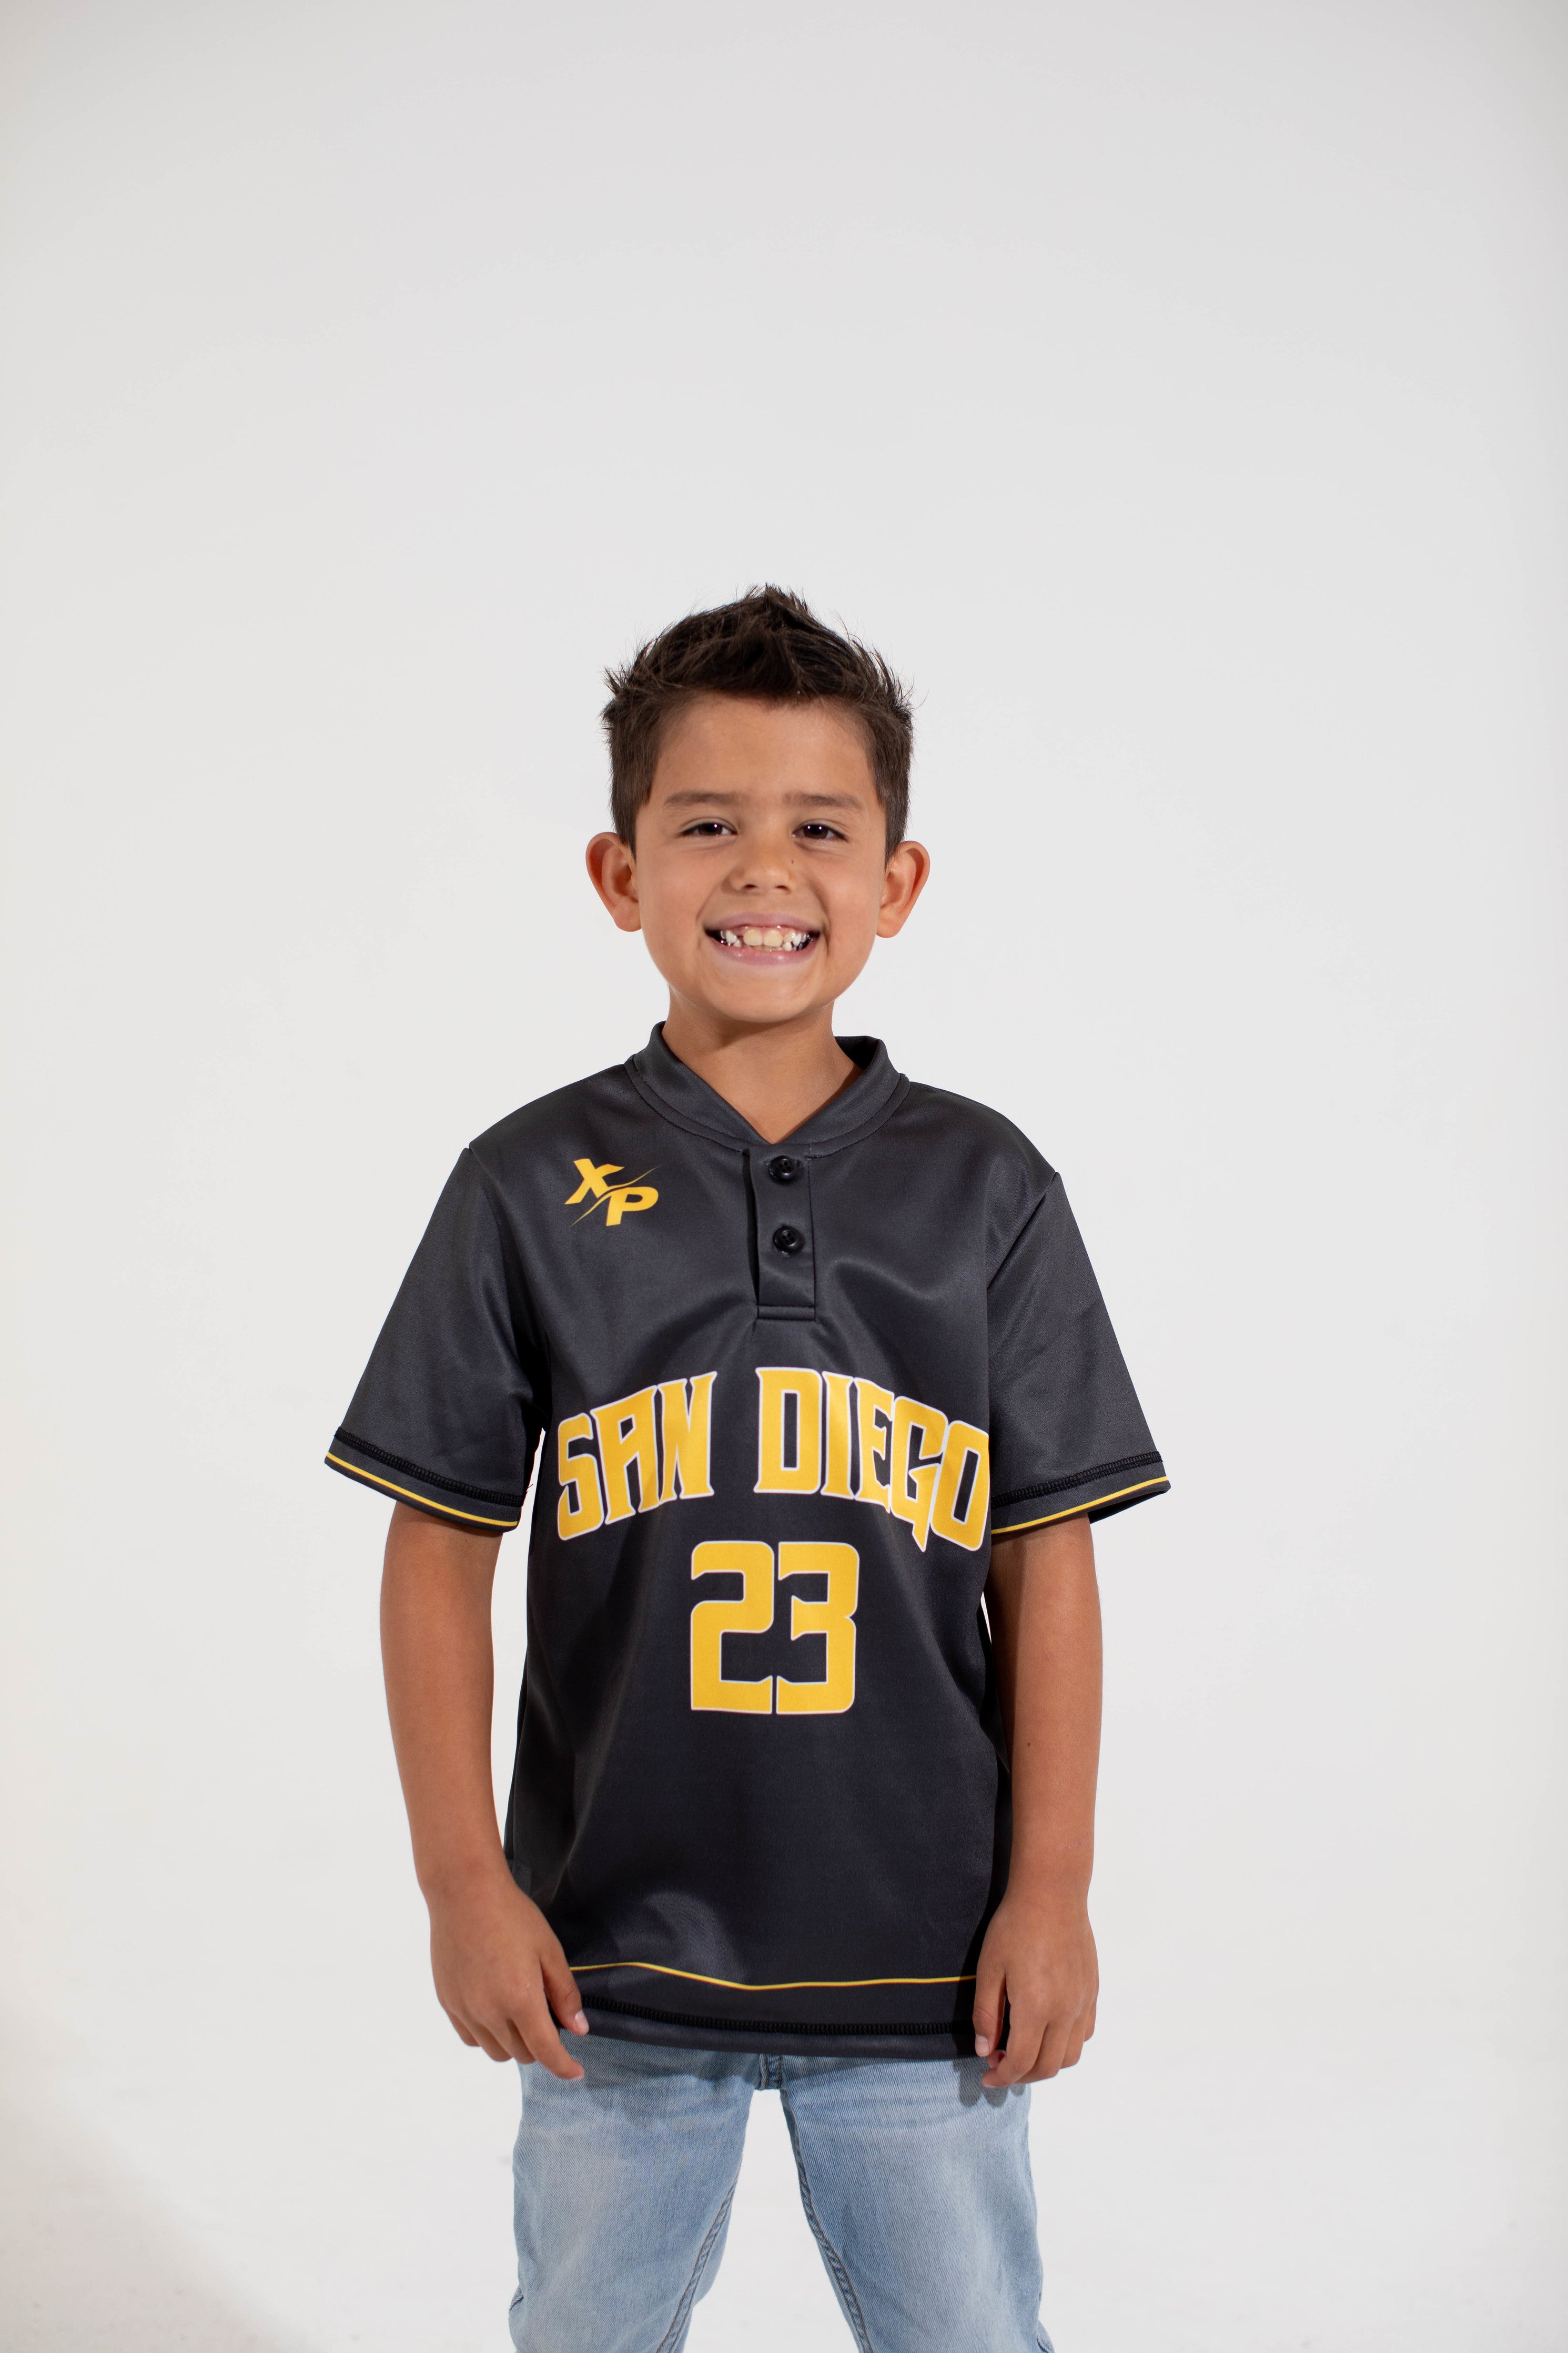 San Diego Two button Baseball Jersey in Black